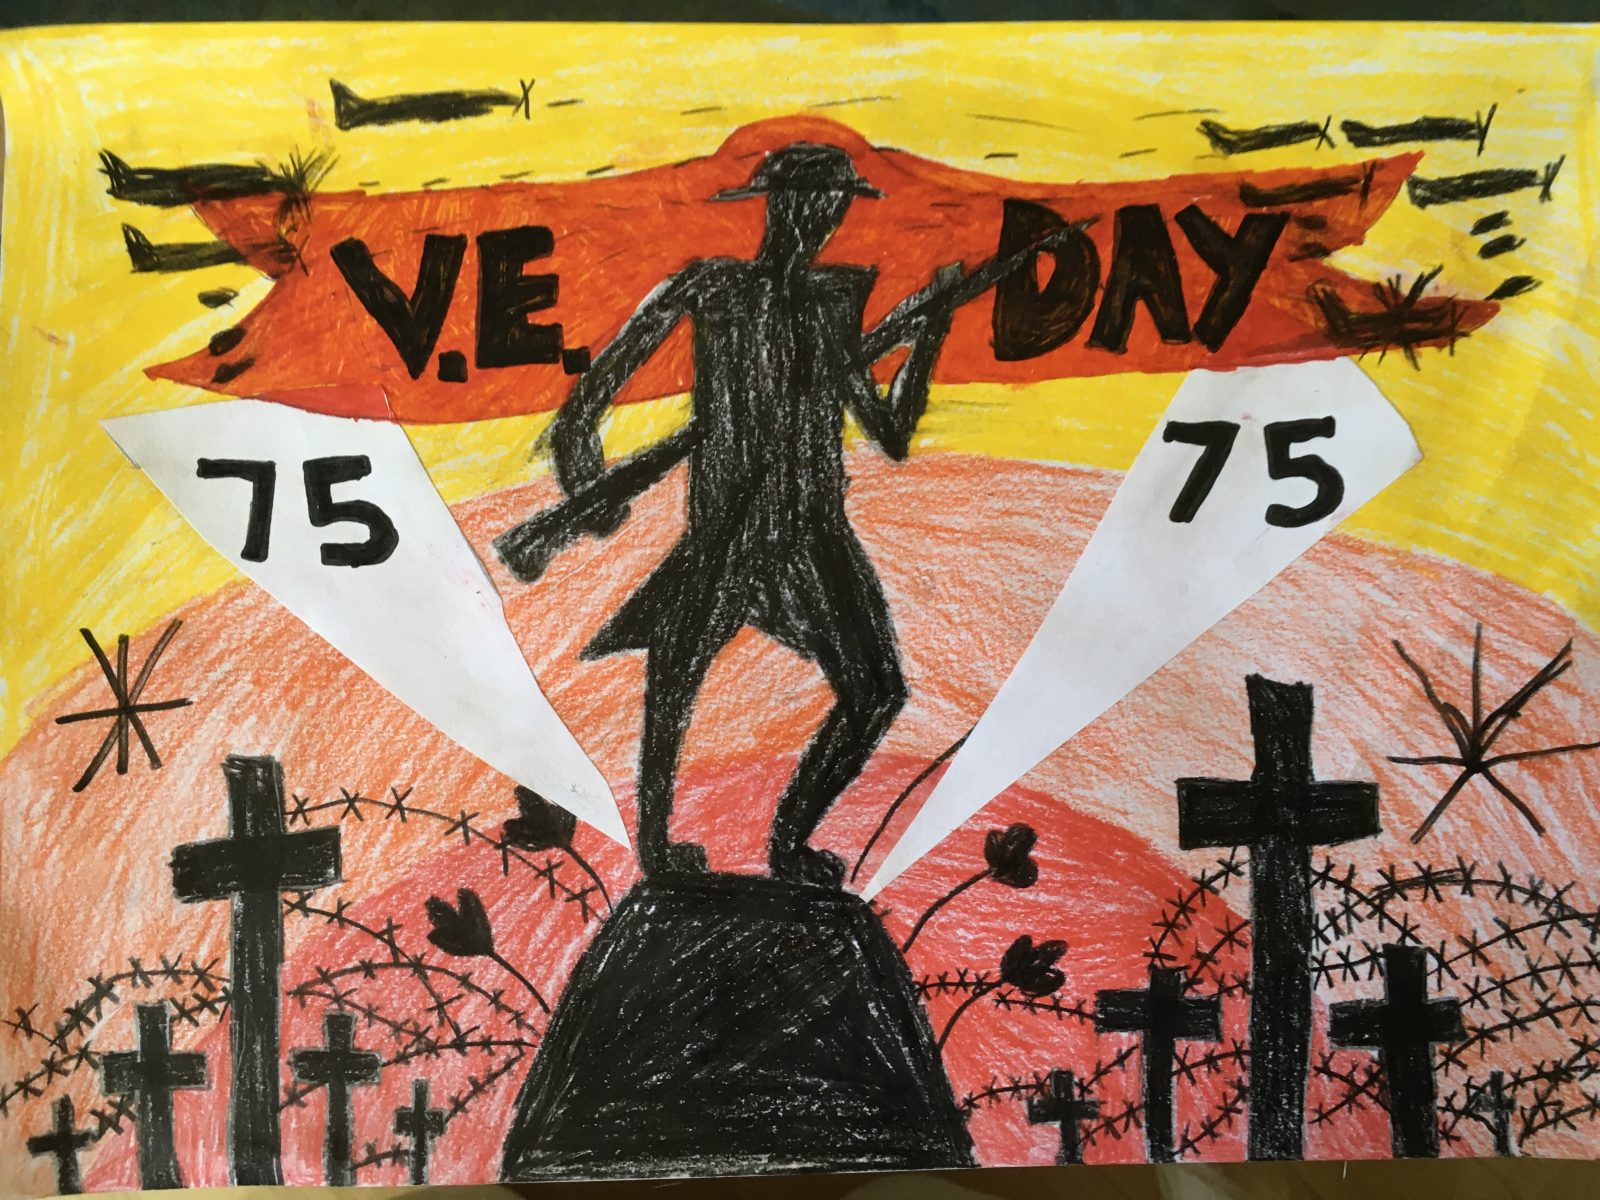 ve-day-poster-competition-results